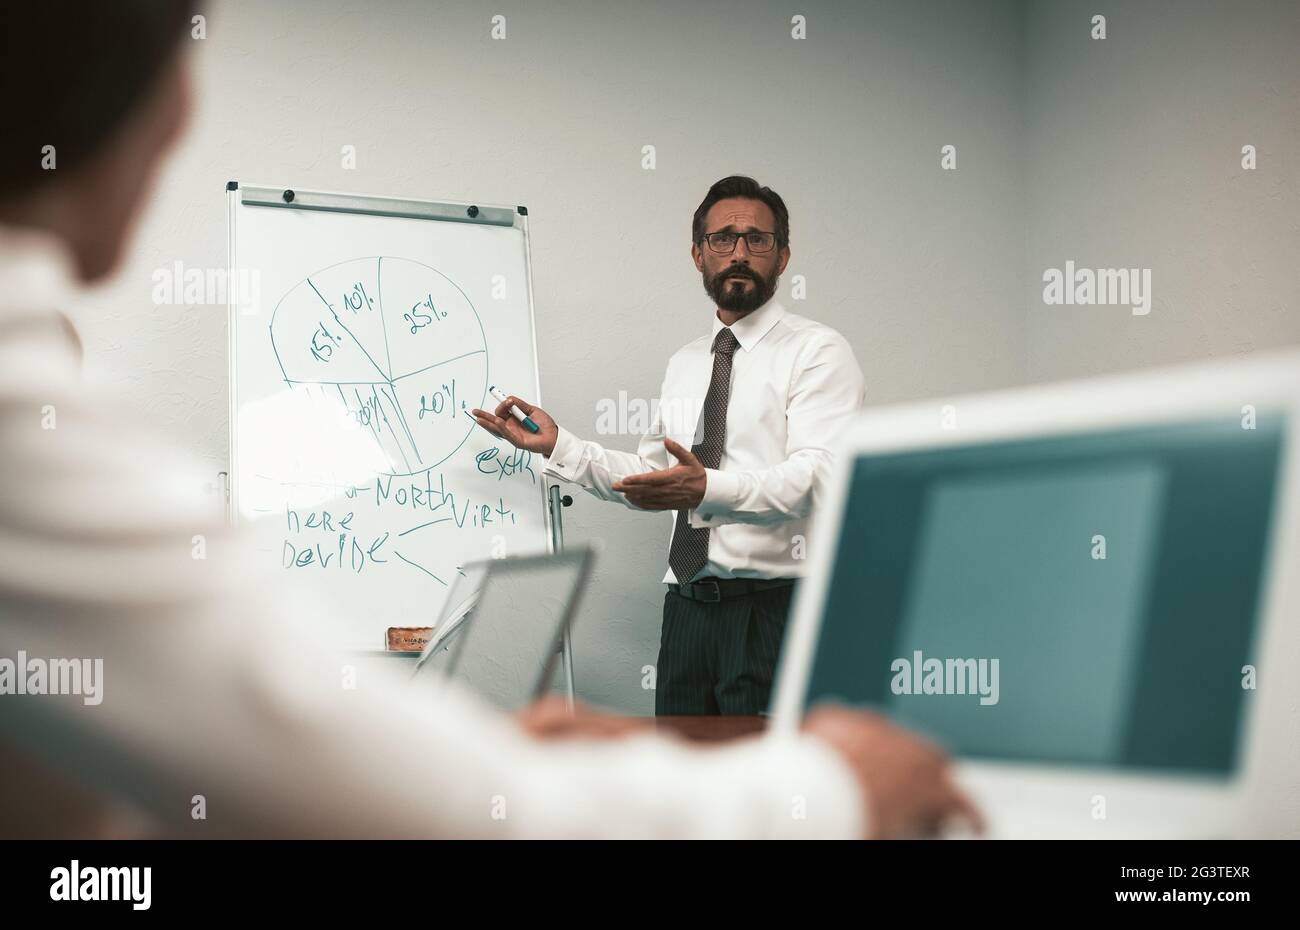 Mature man making business presentation or conference. Speaker man stands near whiteboard having discussion with business people Stock Photo